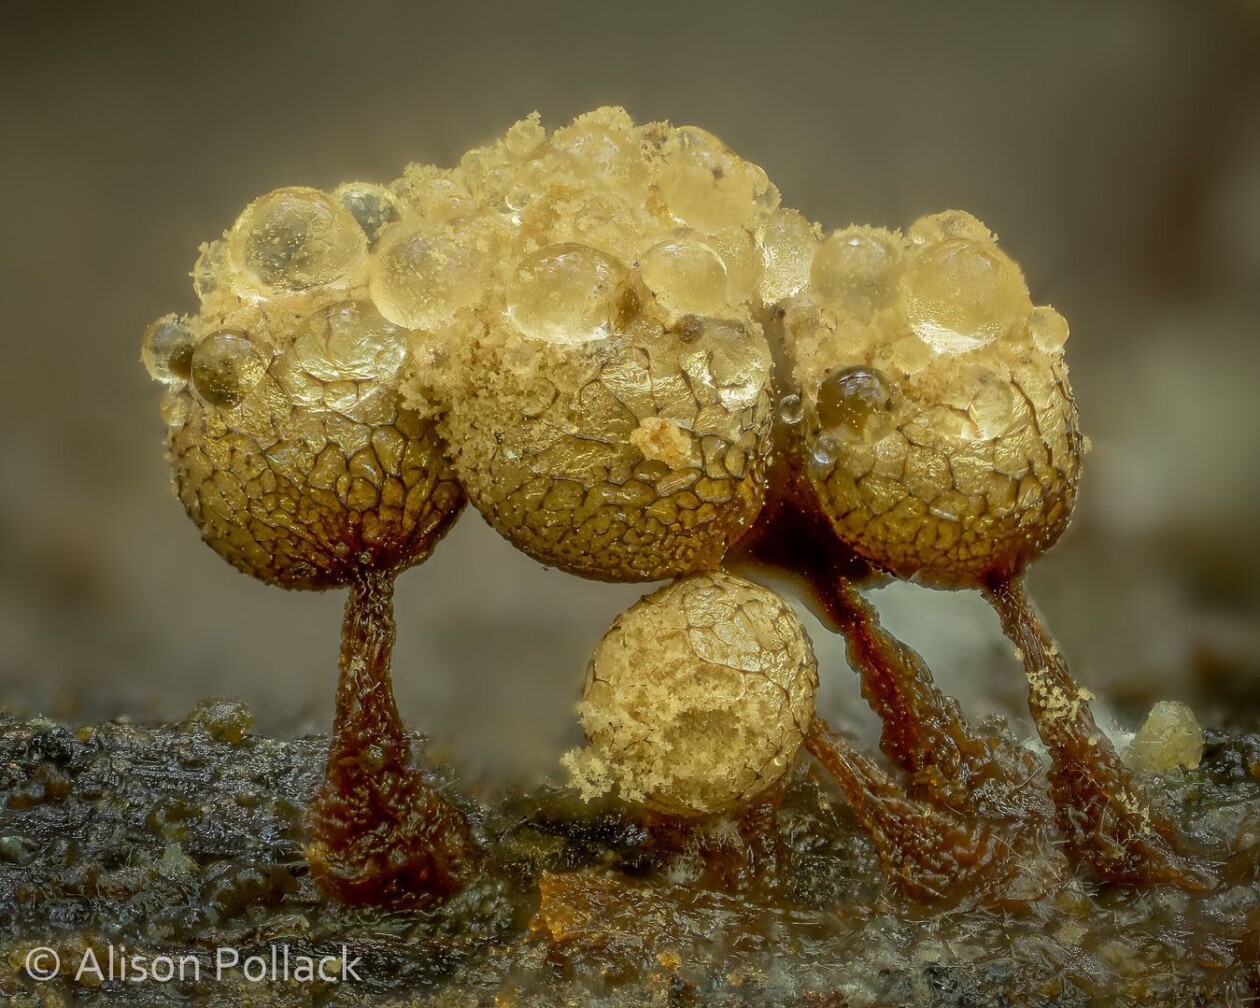 The Microscopic Majesty Of Mushrooms And Molds Captured By Alison Pollack (4)